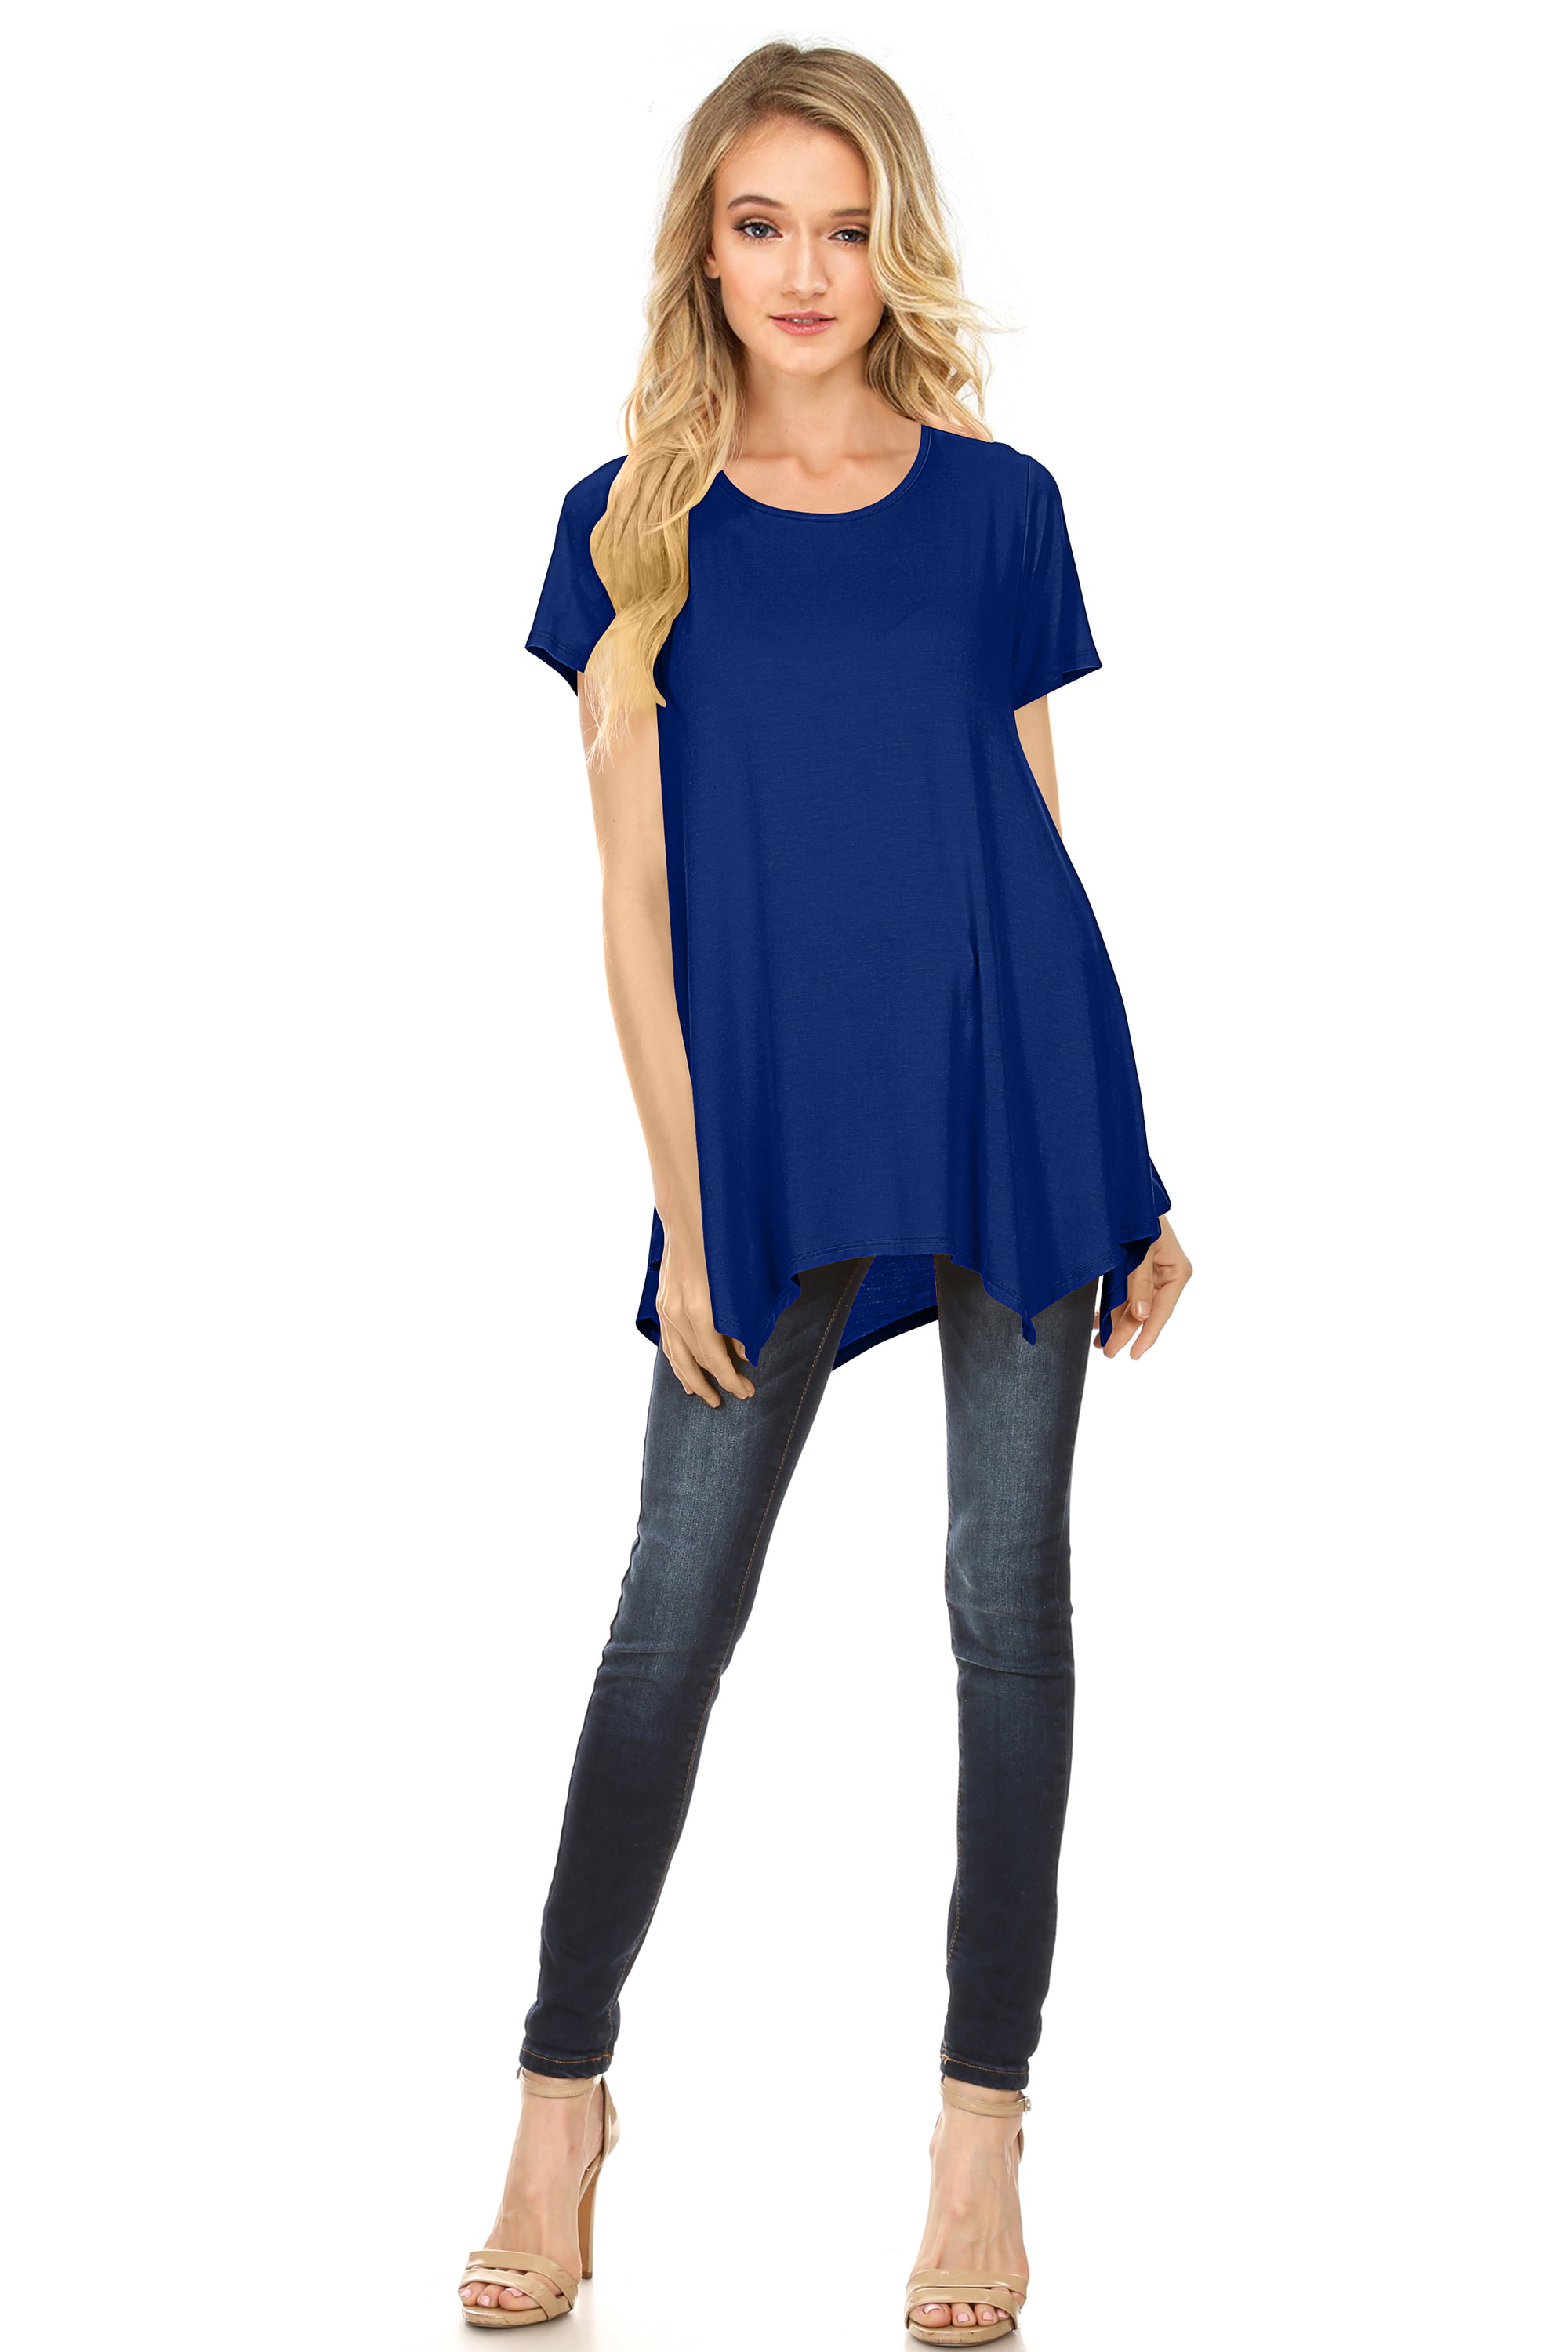 NYL Apparel Womens Short Sleeve Scoop Neck Flowy Tunic Top - Made in ...